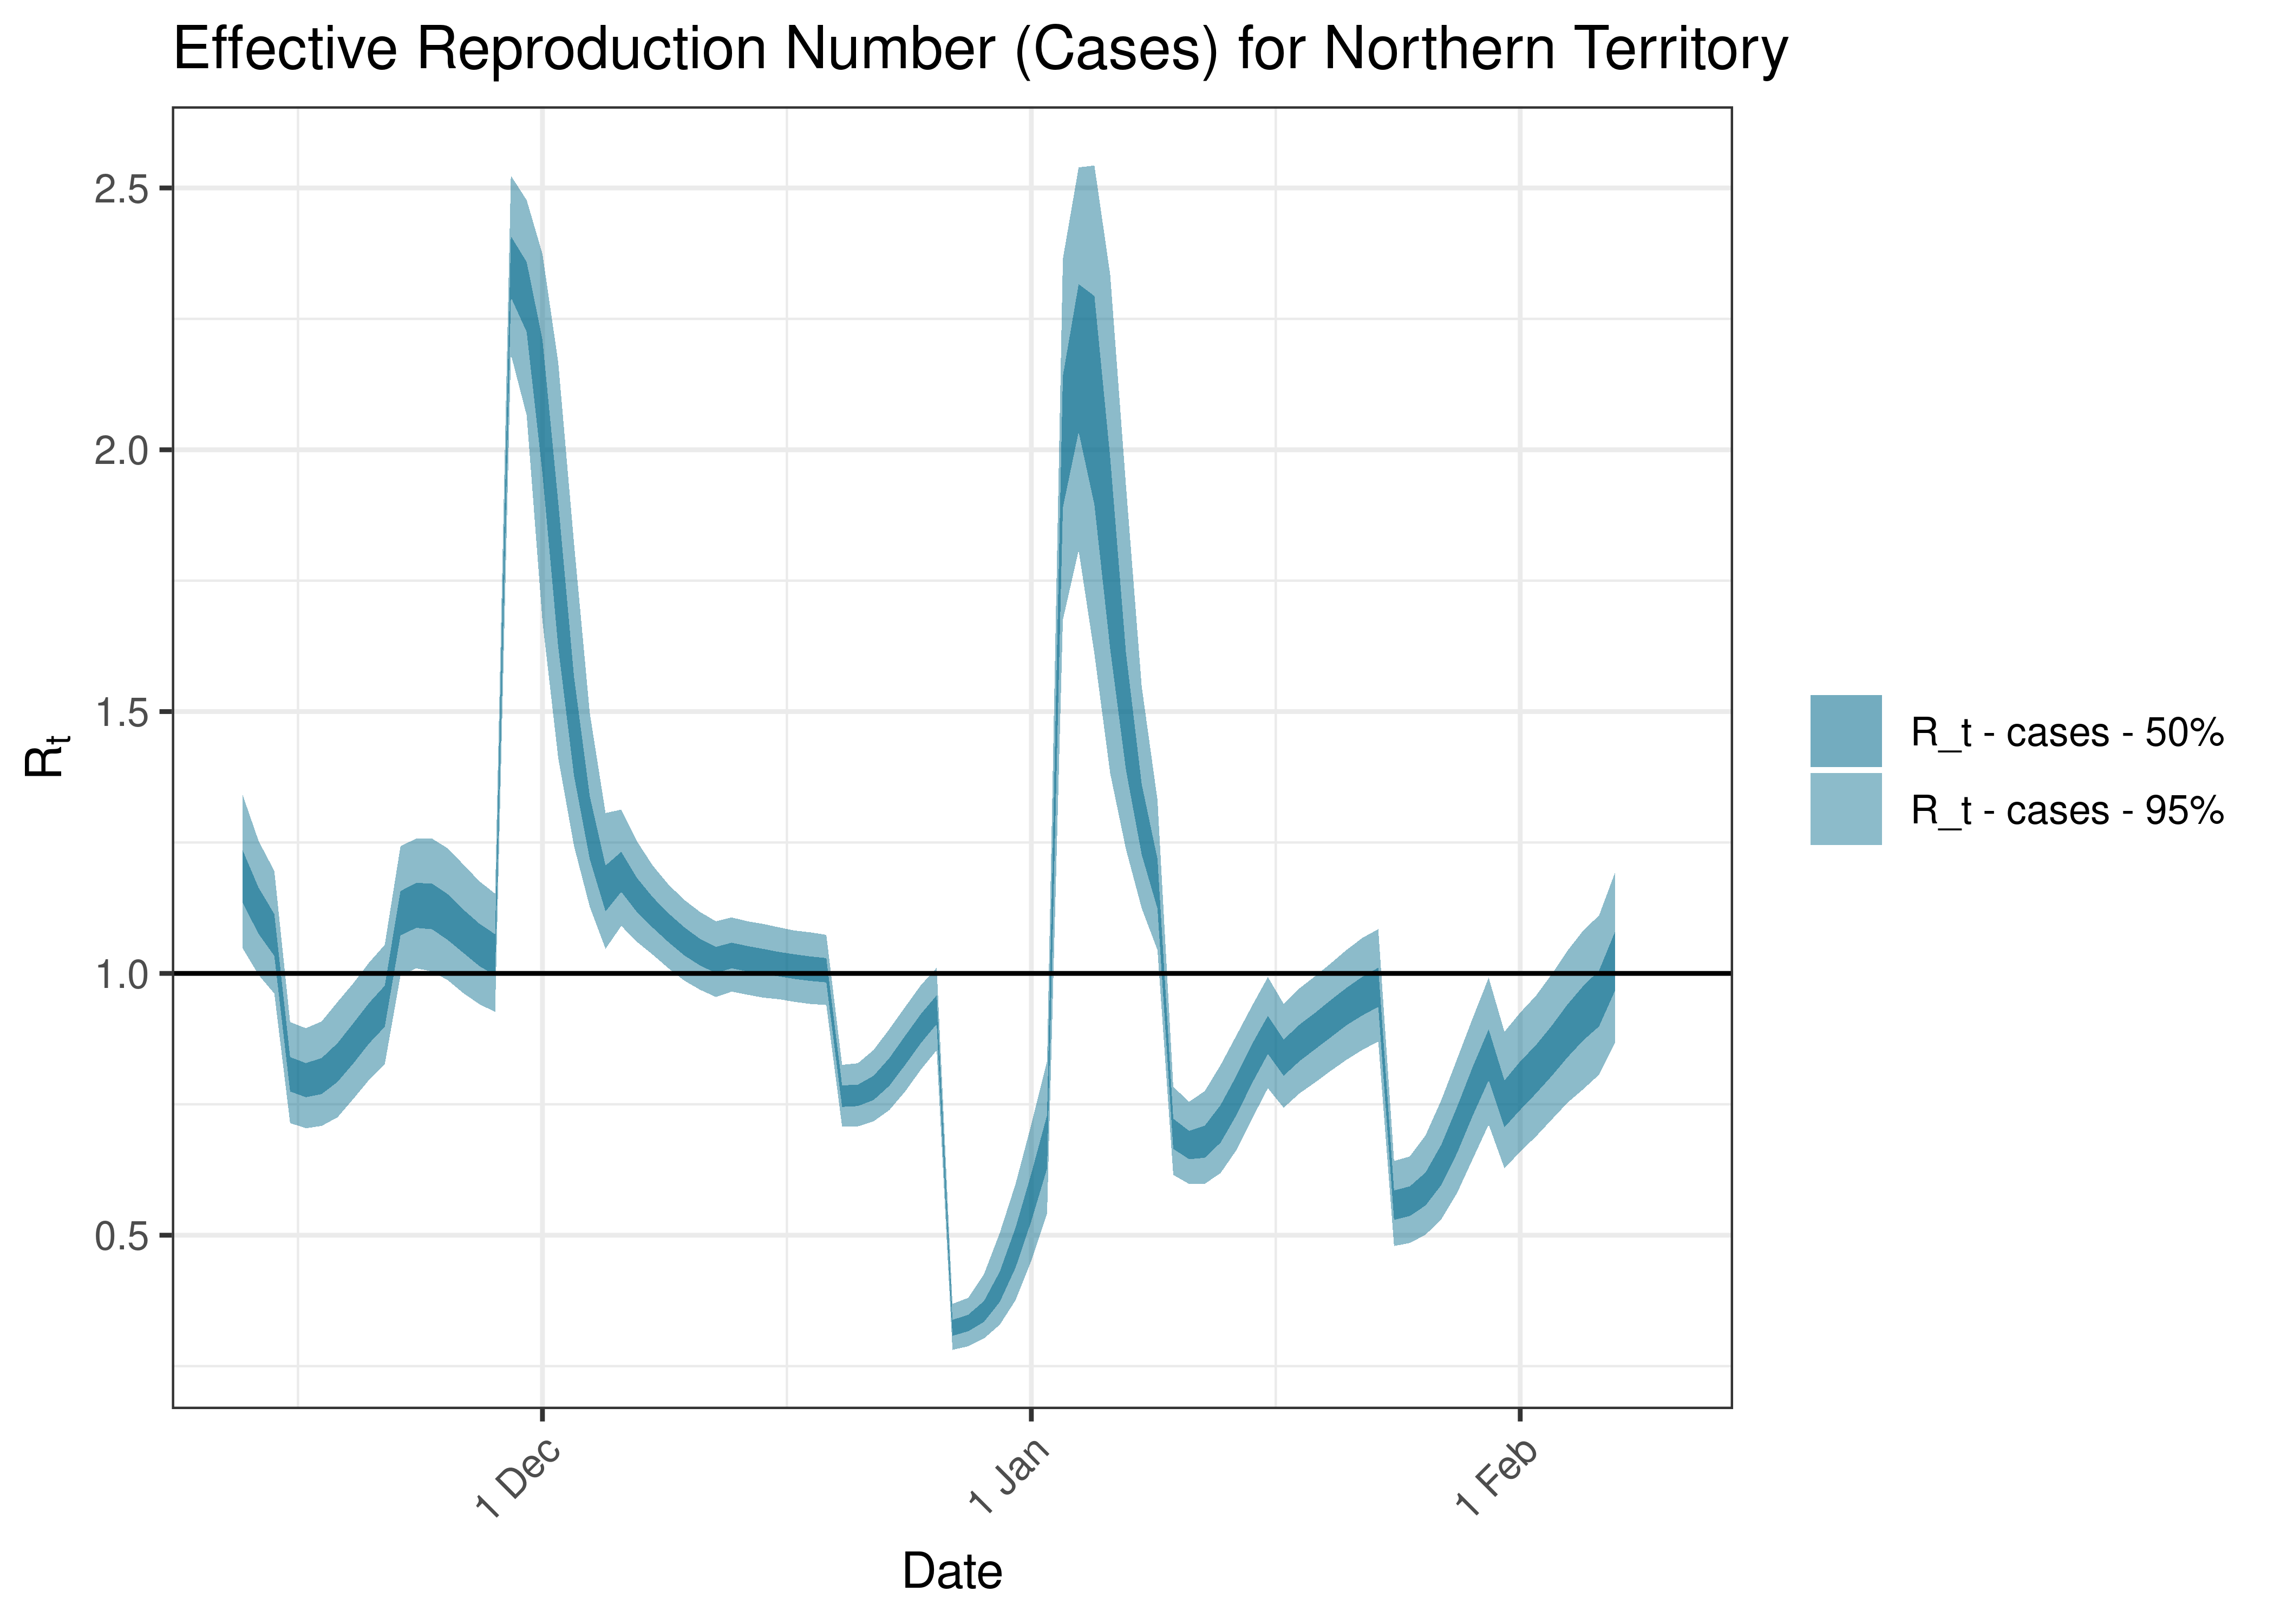 Estimated Effective Reproduction Number Based on Cases for Northern Territory over last 90 days